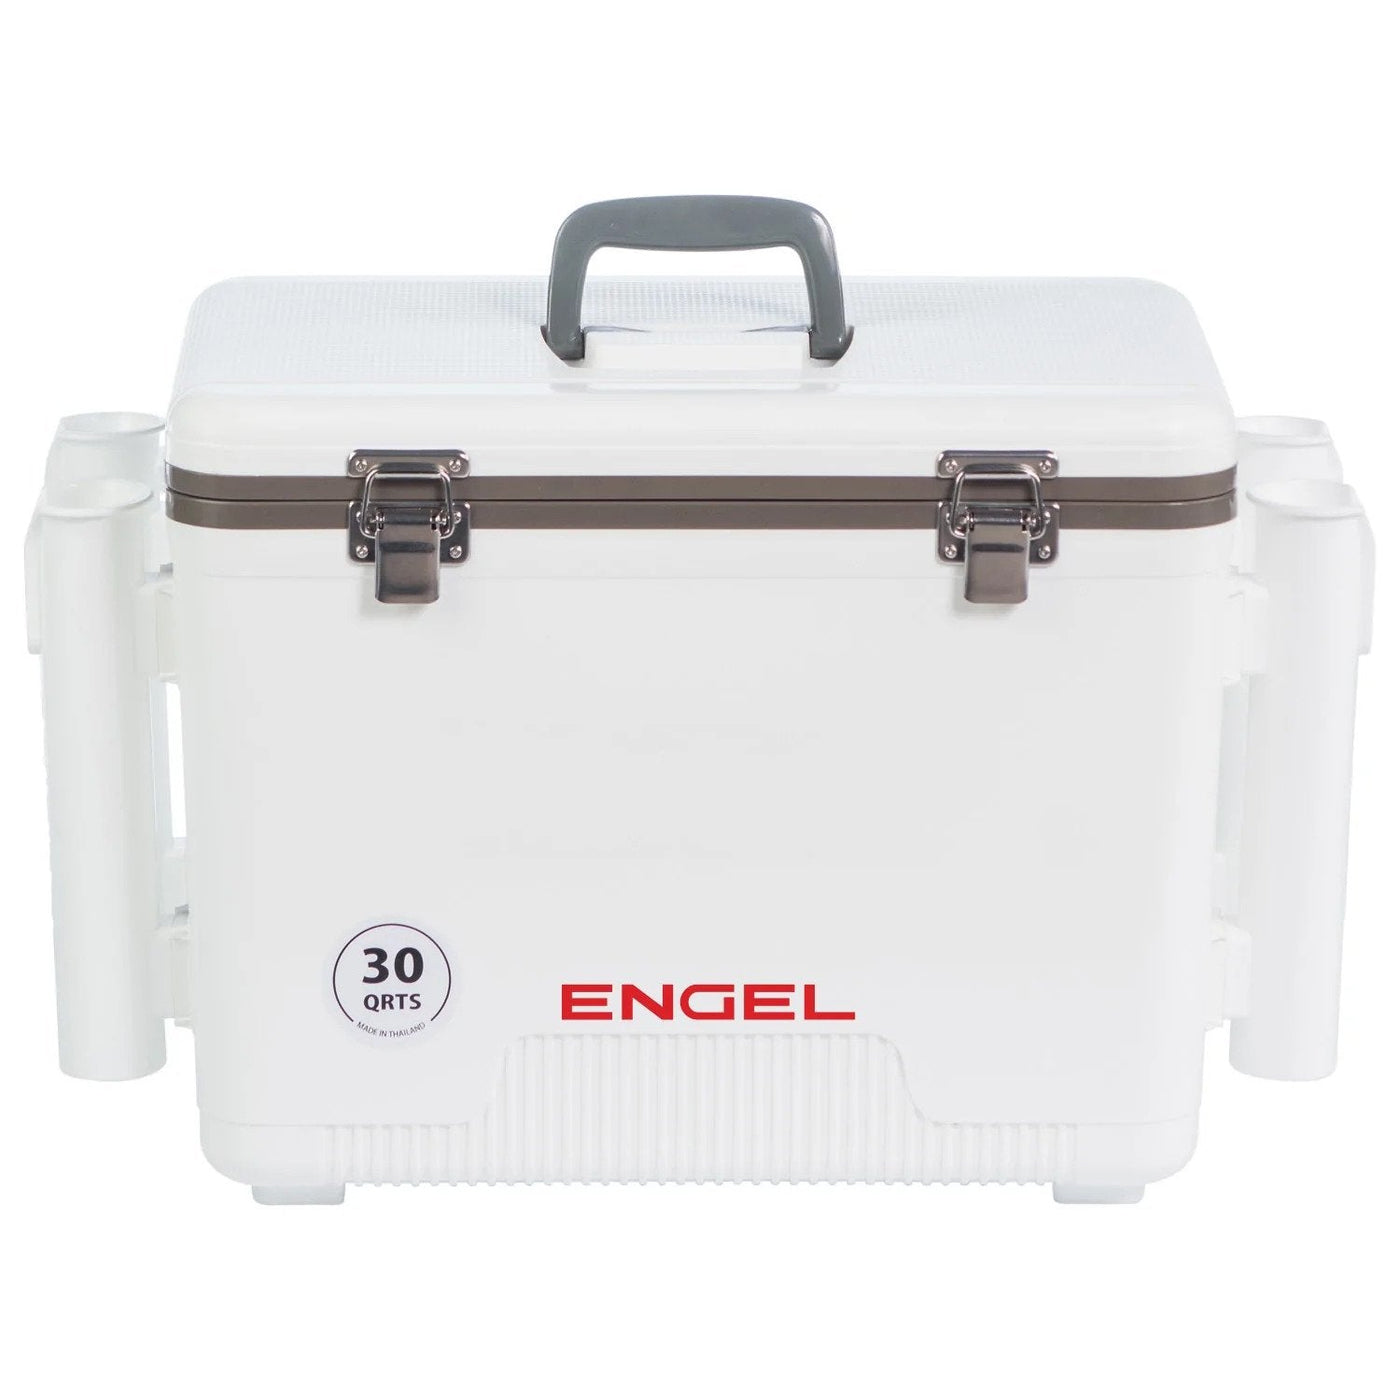 Engel® 30 Quart Drybox/Cooler with Rod Holders Coolers Engel Coolers White 